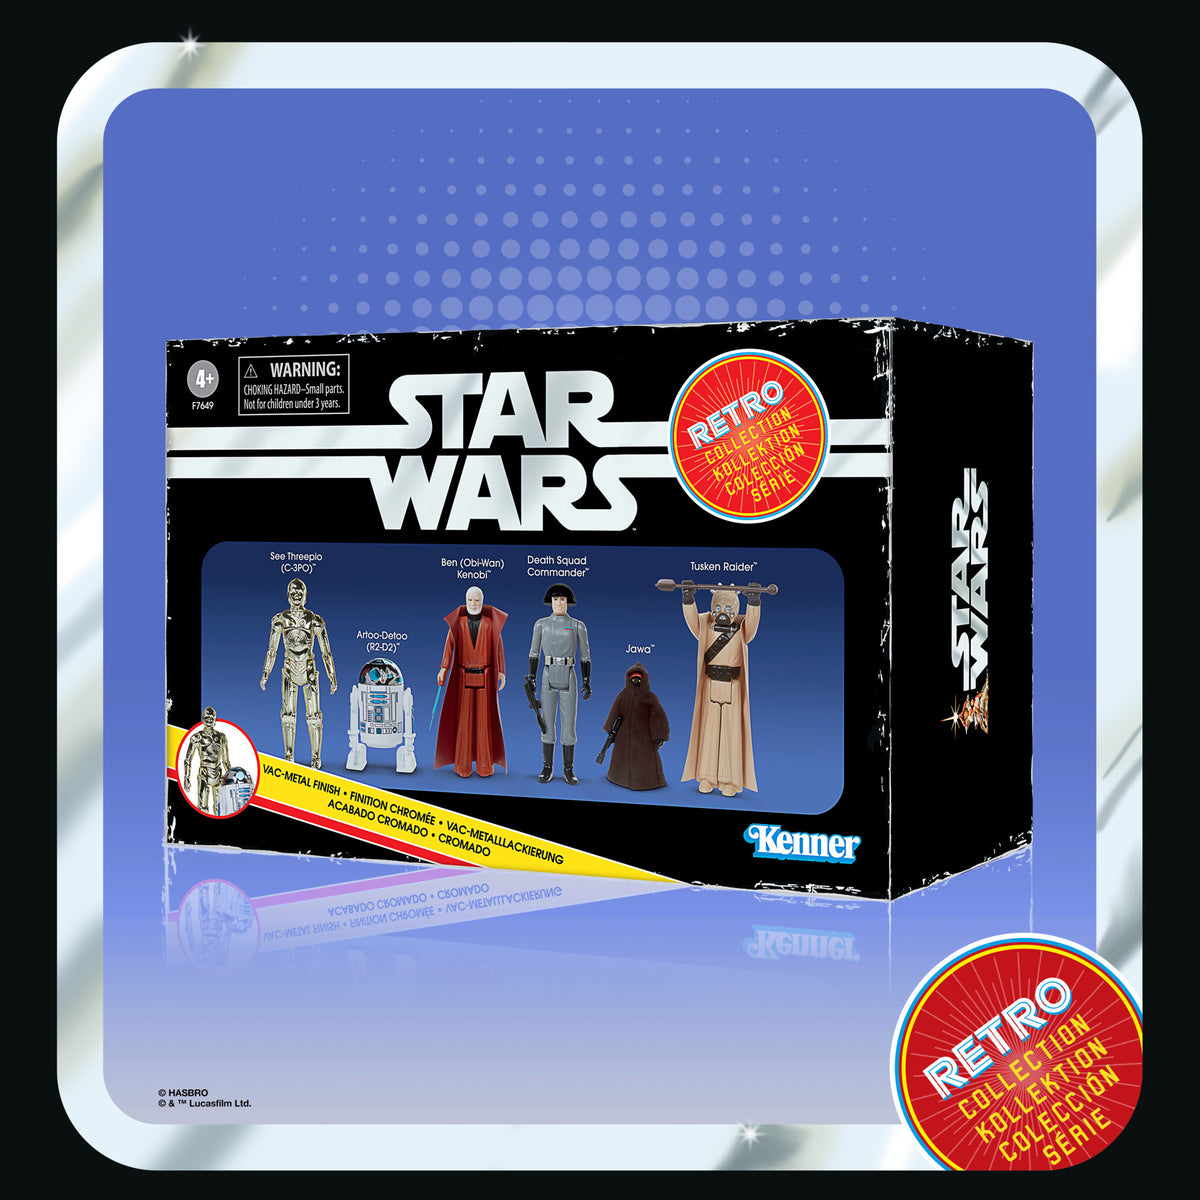 Hasbro re-issues classic Kenner 1970s Star Wars action figures